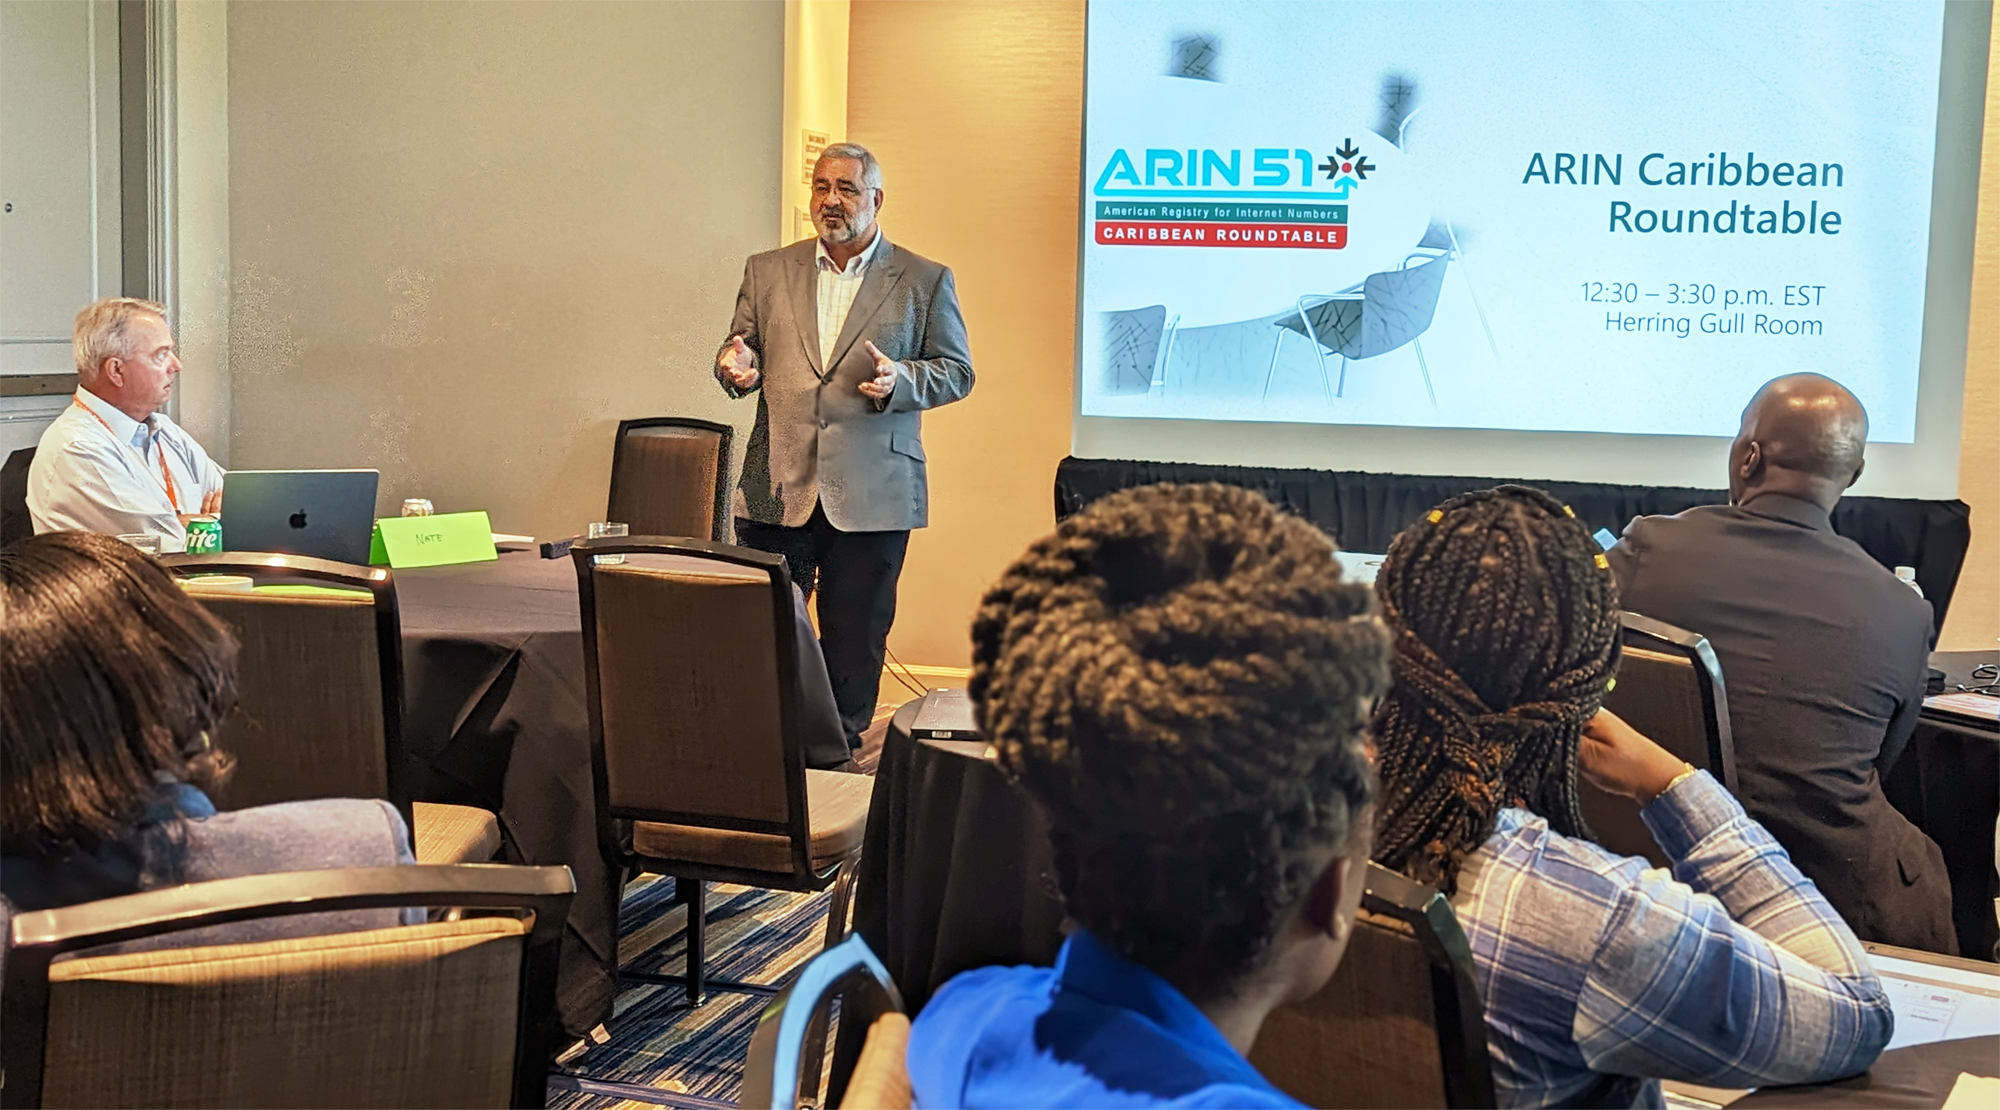 ARIN President and CEO John Curran delivers the featured address at the inaugural Caribbean Roundtable